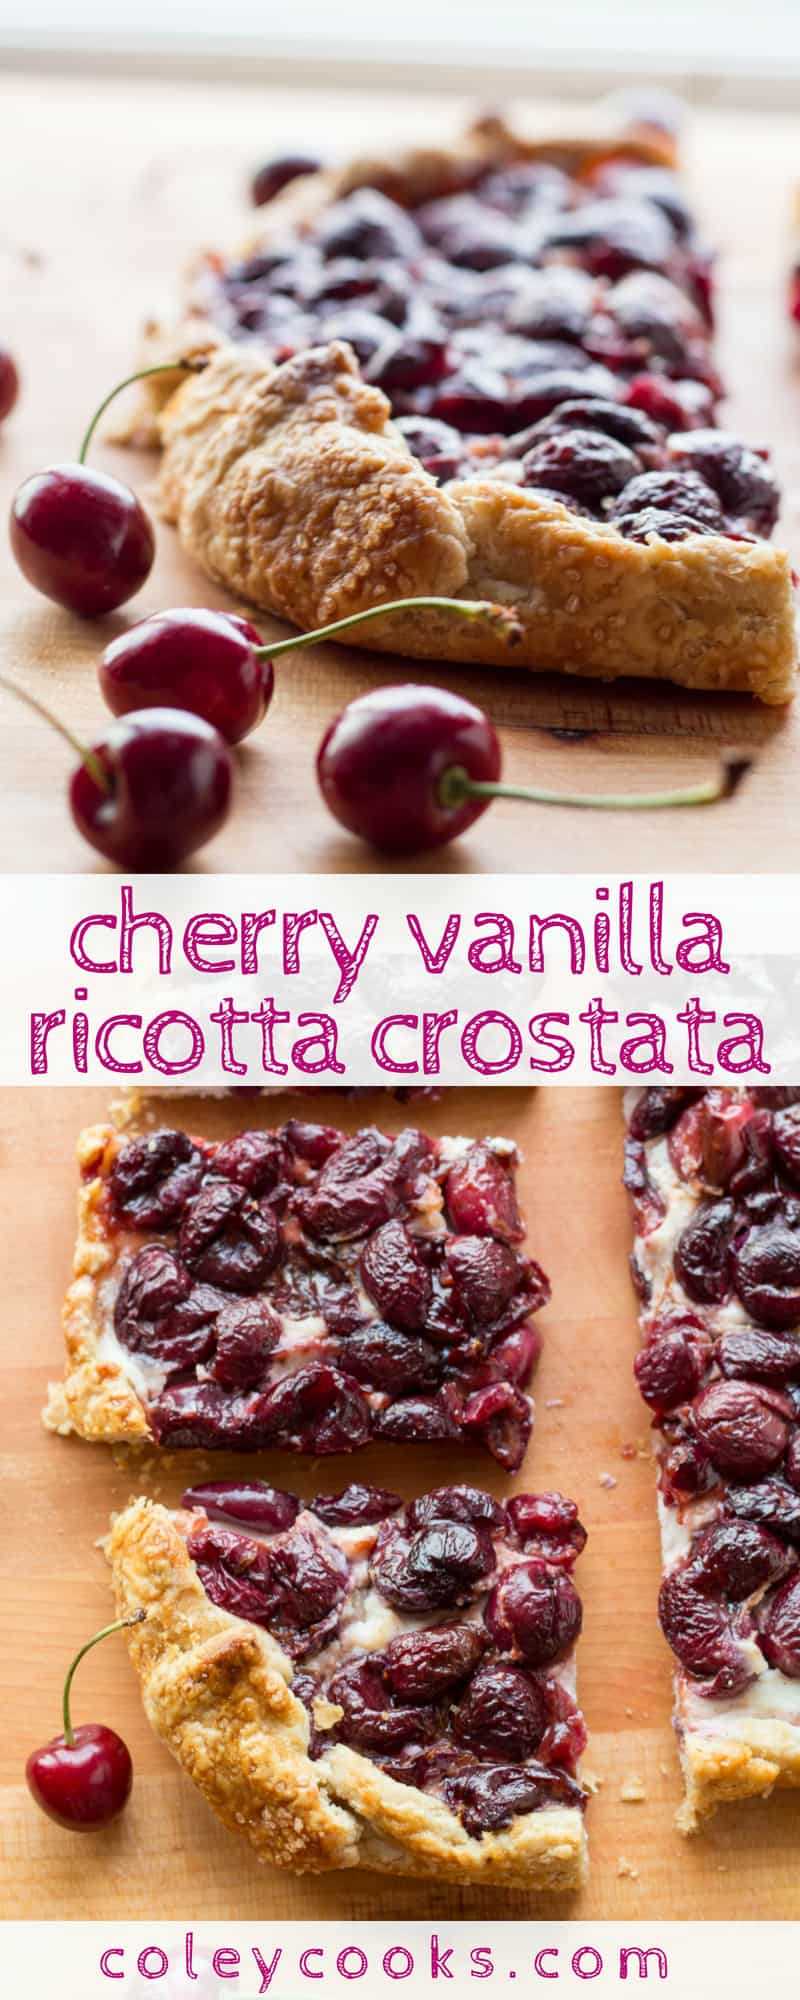 CHERRY VANILLA RICOTTA CROSTATA | Easy cherry pie recipe! This free form cherry pie has a layer of creamy vanilla ricotta underneath fresh cherries, wrapped up in a simple flaky crust! #recipe #summer #cherry #pie #ricotta #dessert | ColeyCooks.com